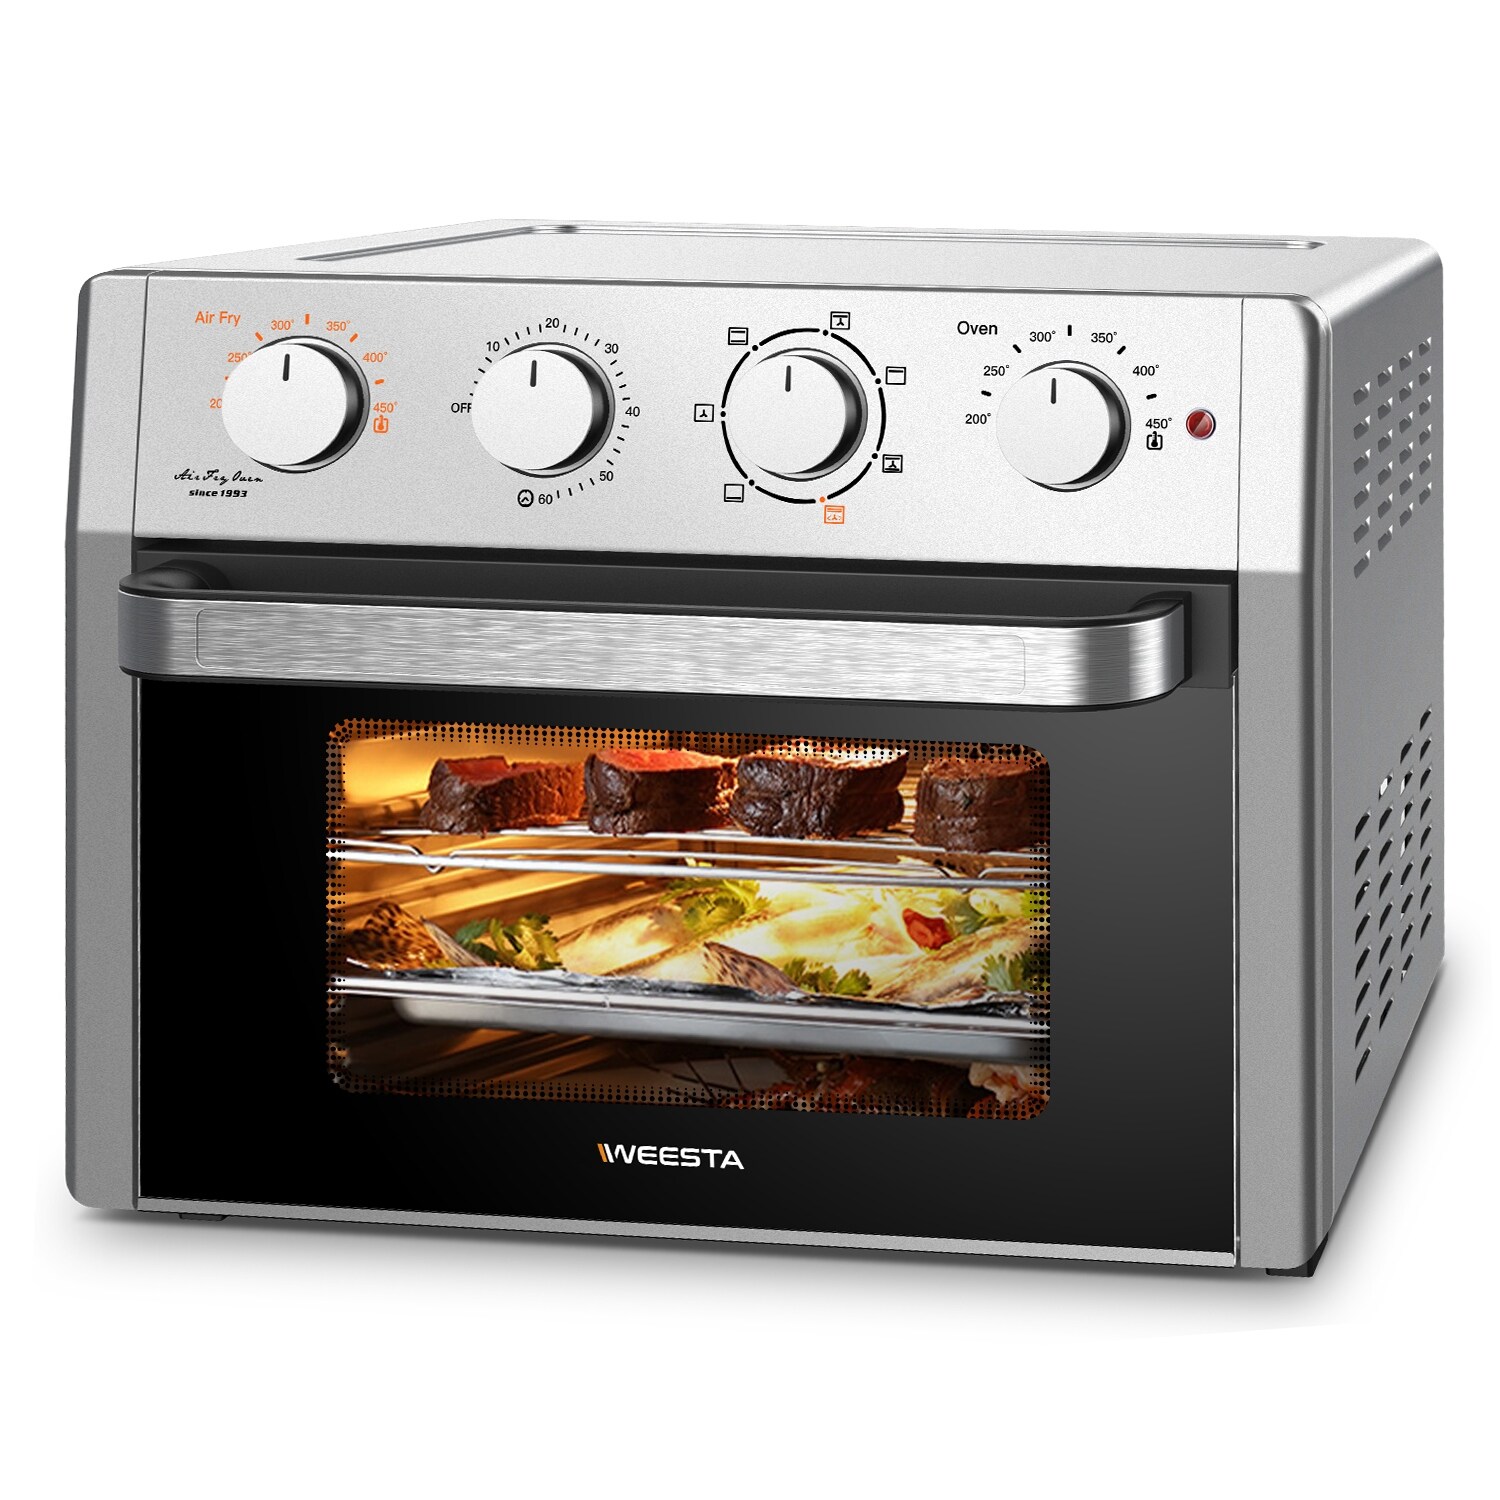 iCucina Toaster Oven Air Fryer Combo, Countertop Oven with 4 Slice Toaster,  7-in-1 Appliance with Stainless Steel Accessories 